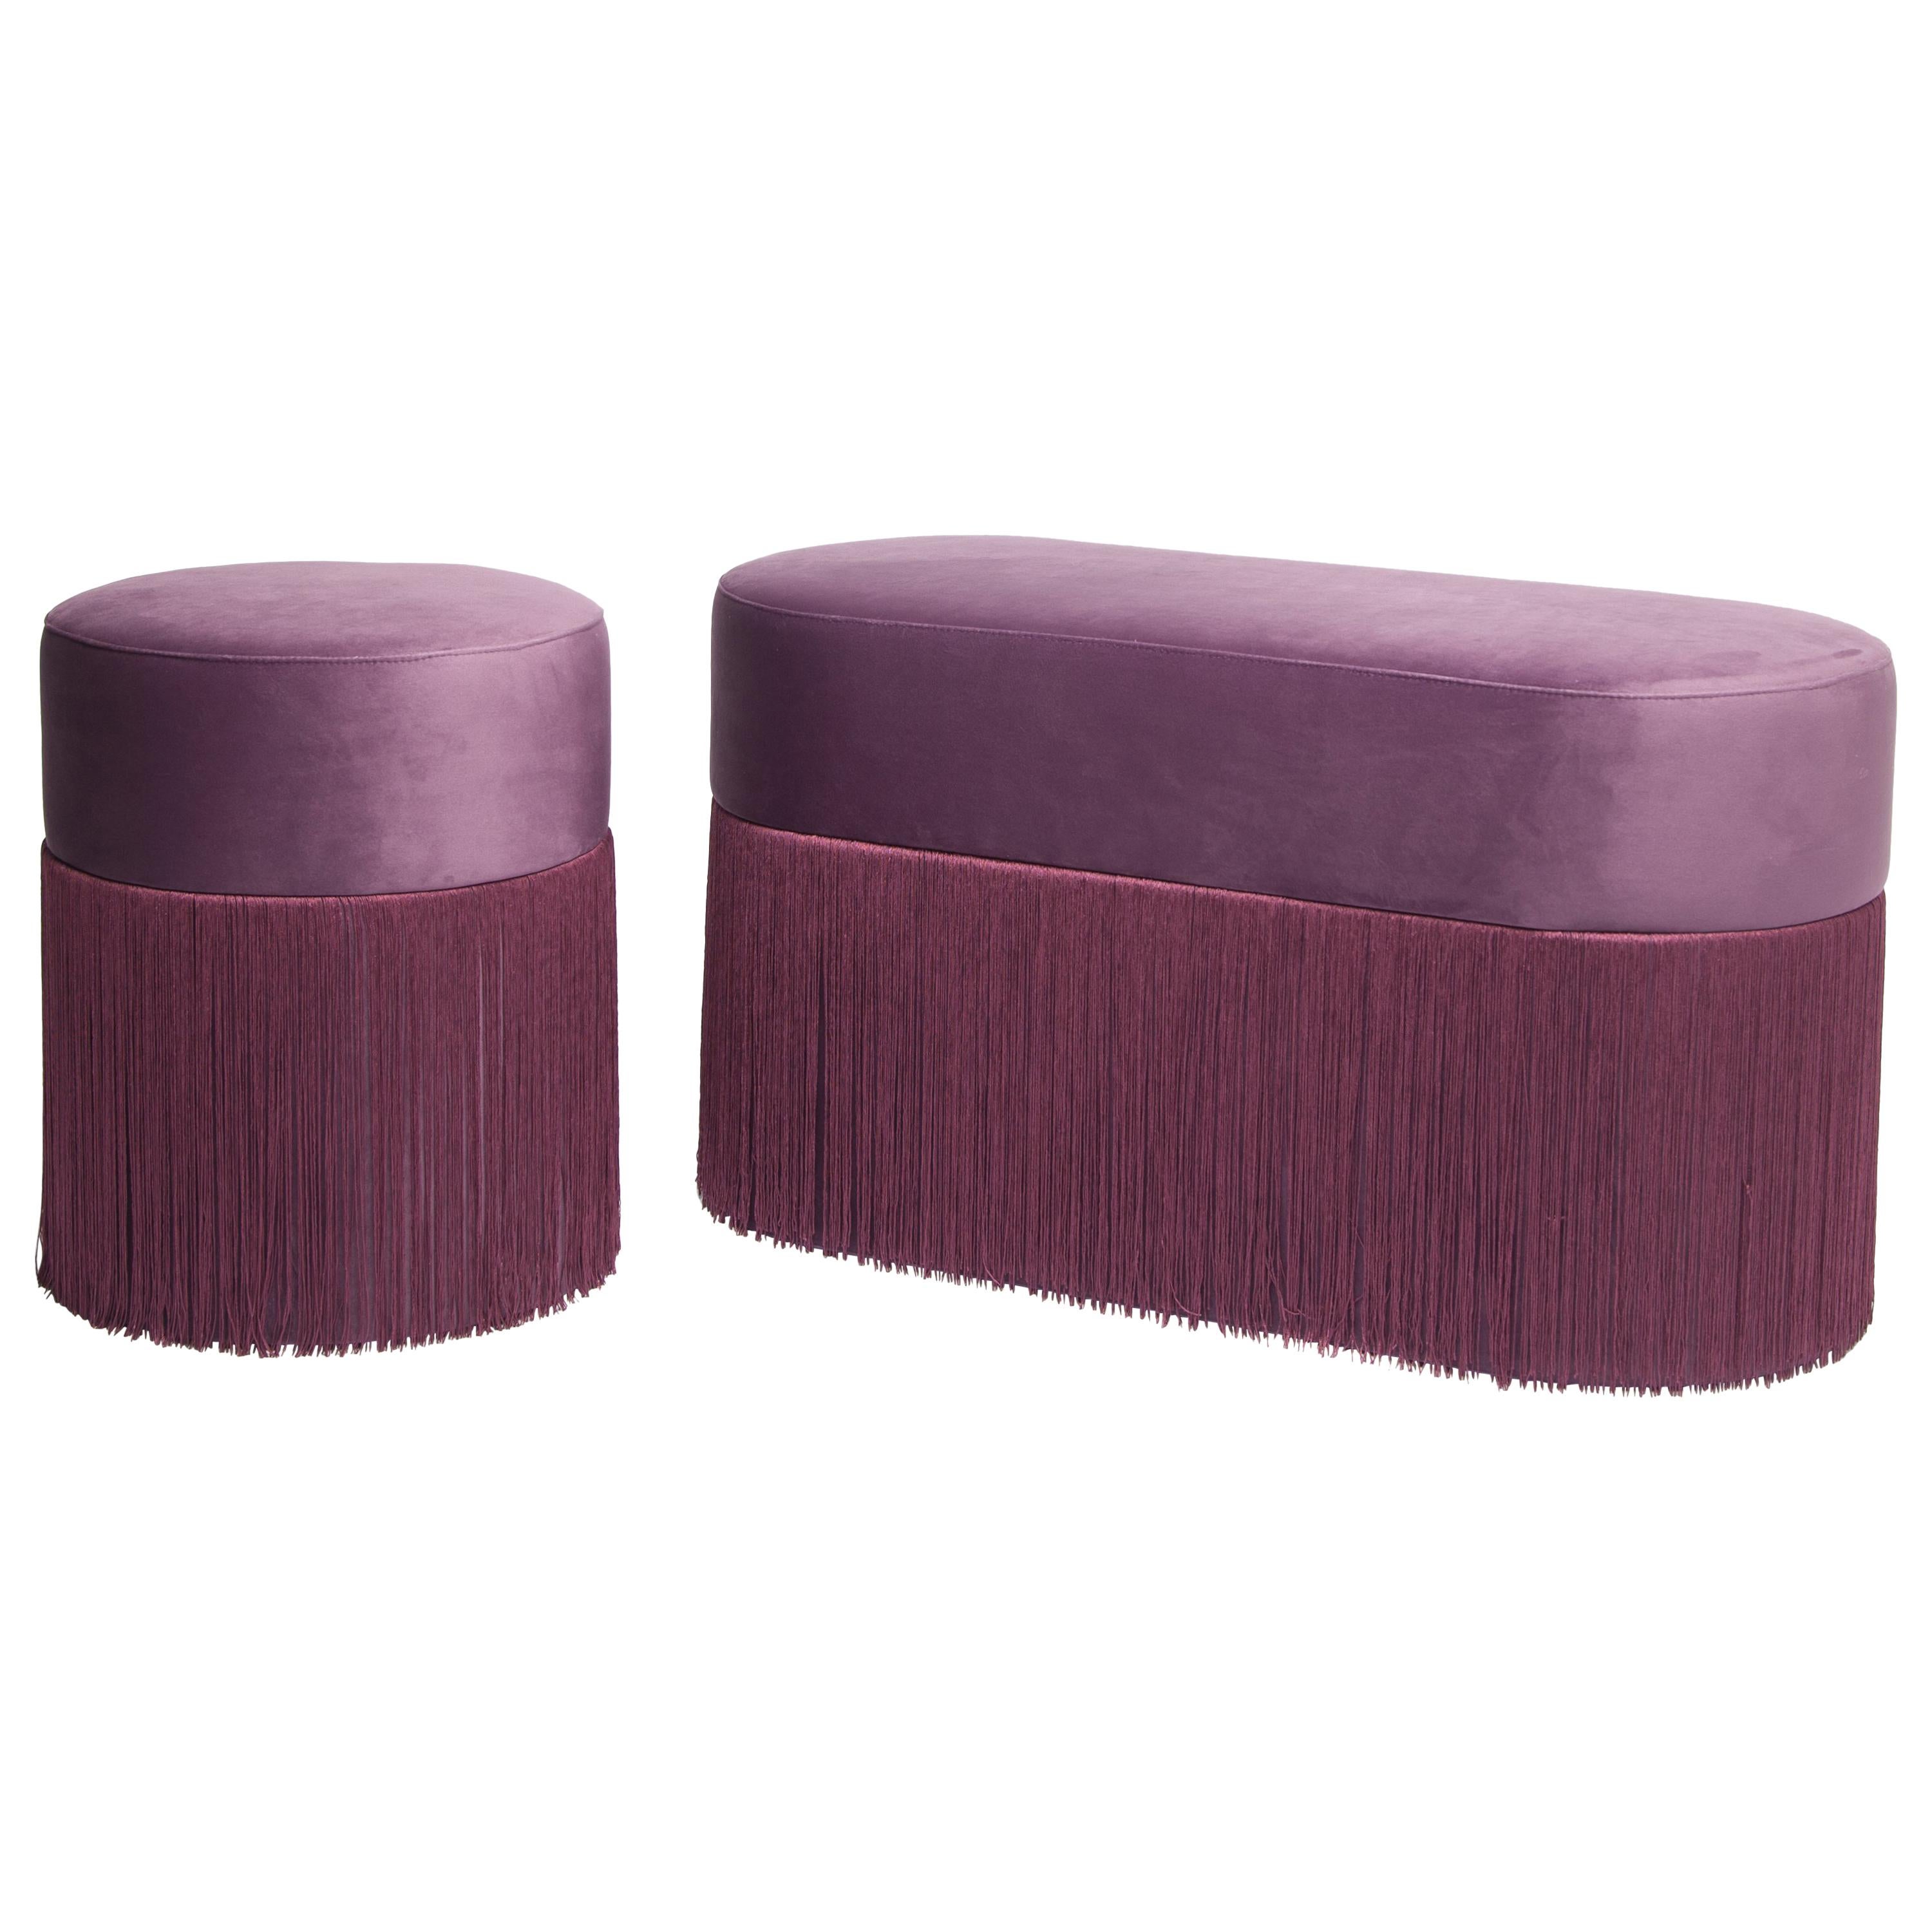 Pair of Pouf Pill Small and Large Purple in Velvet Upholstery and Fringes For Sale